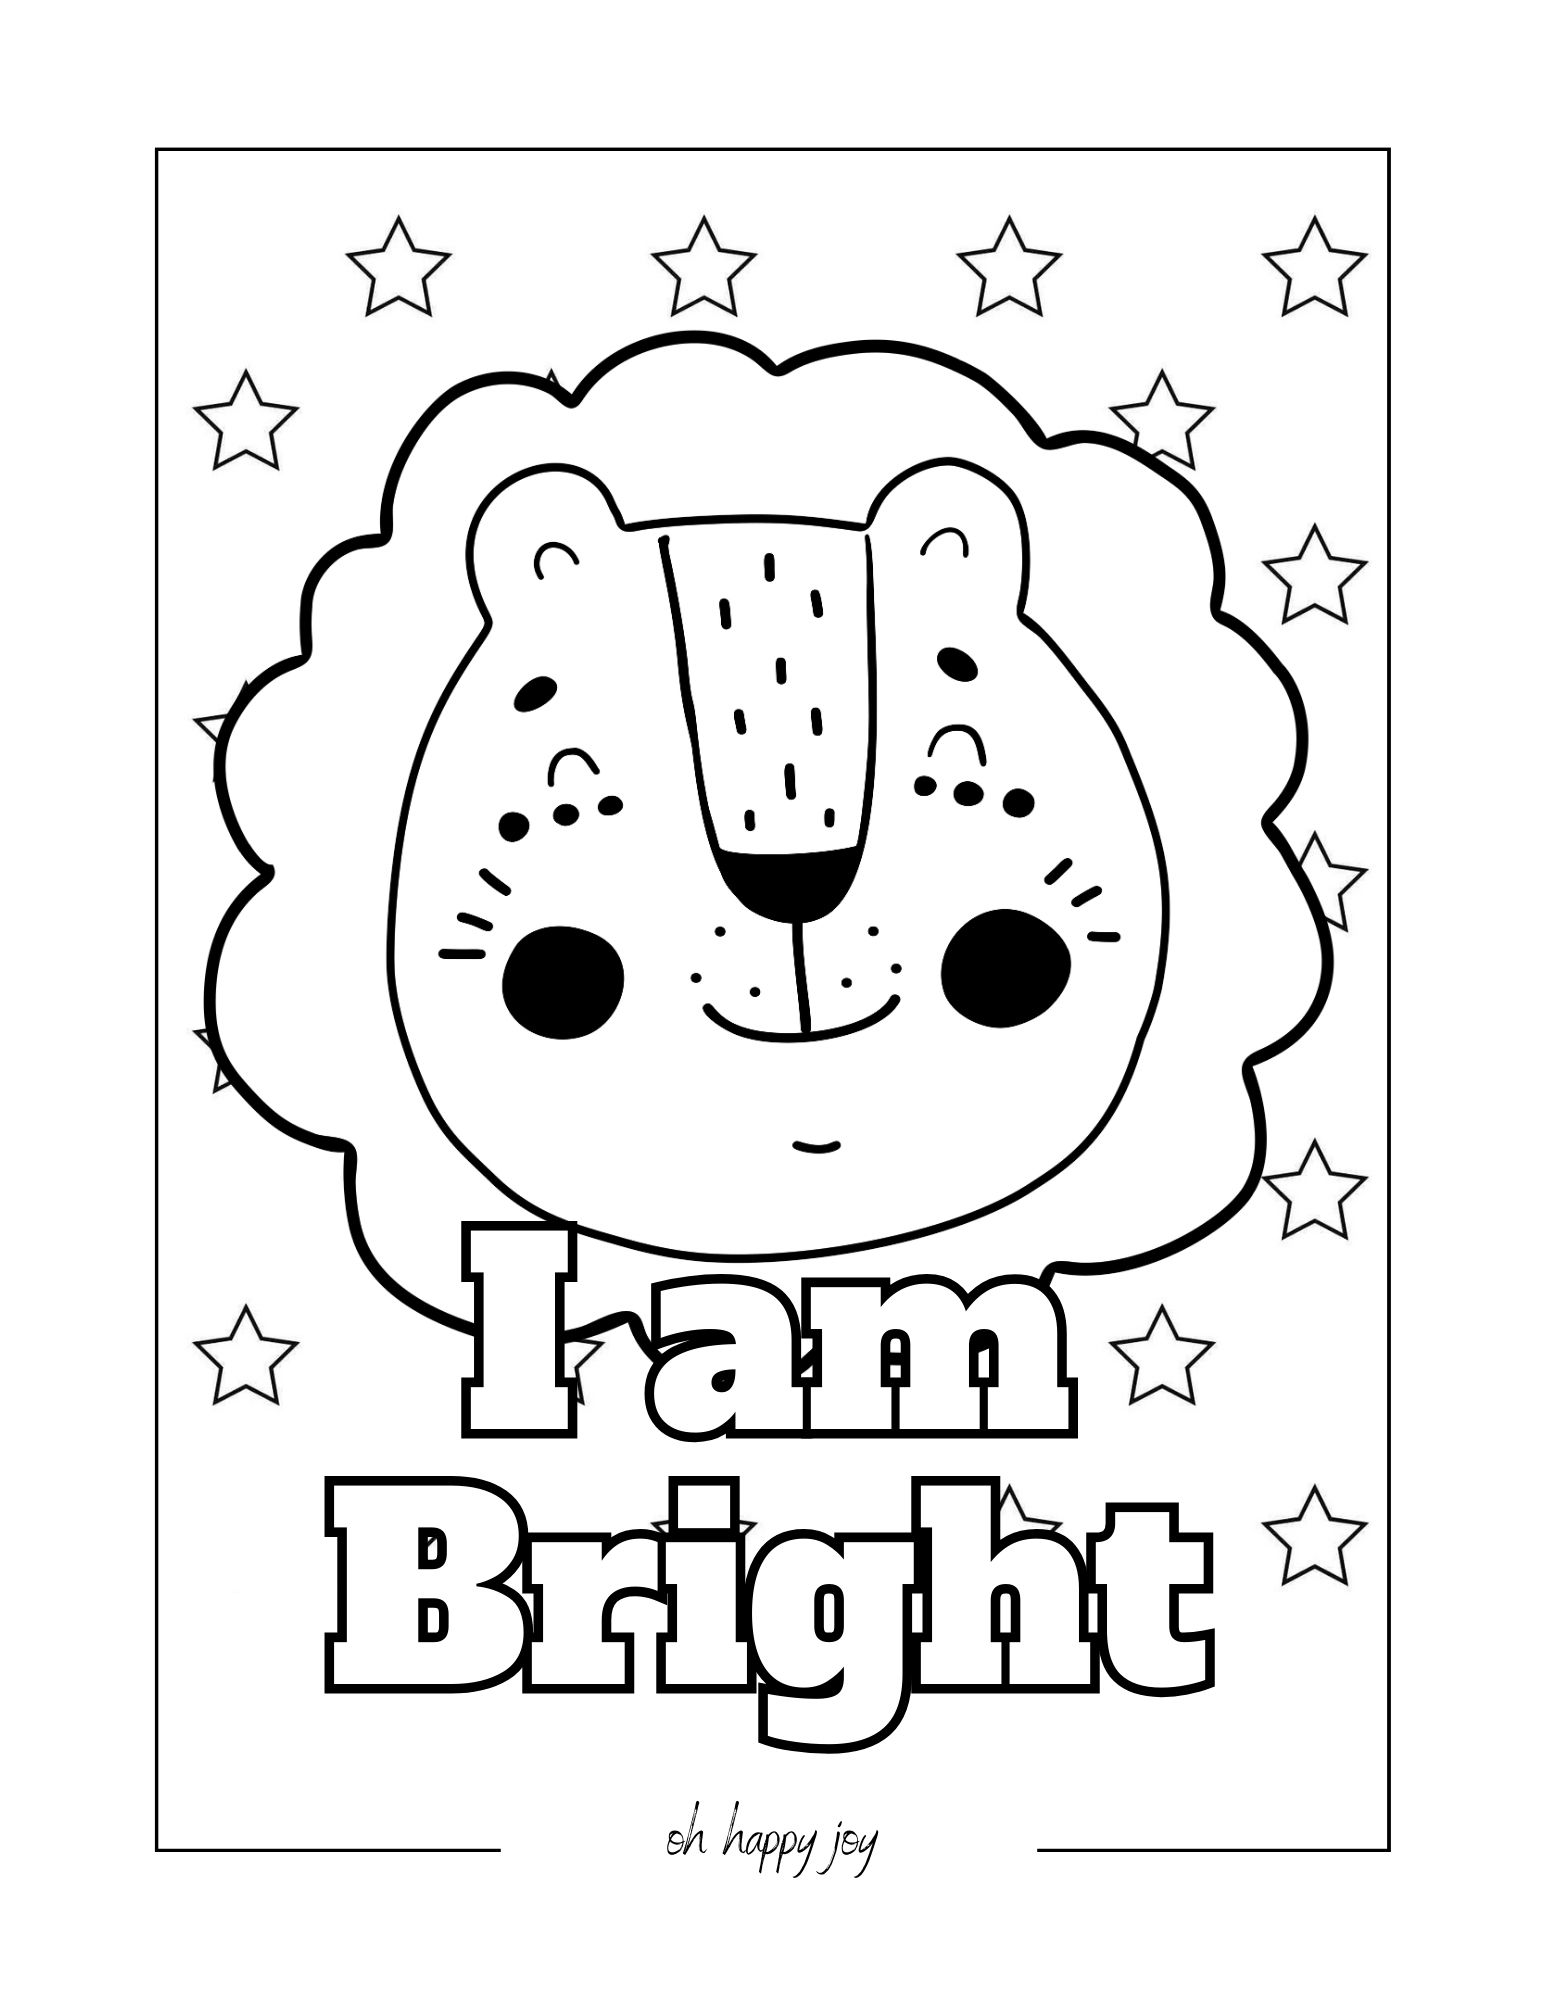 I am bright affirmation coloring page